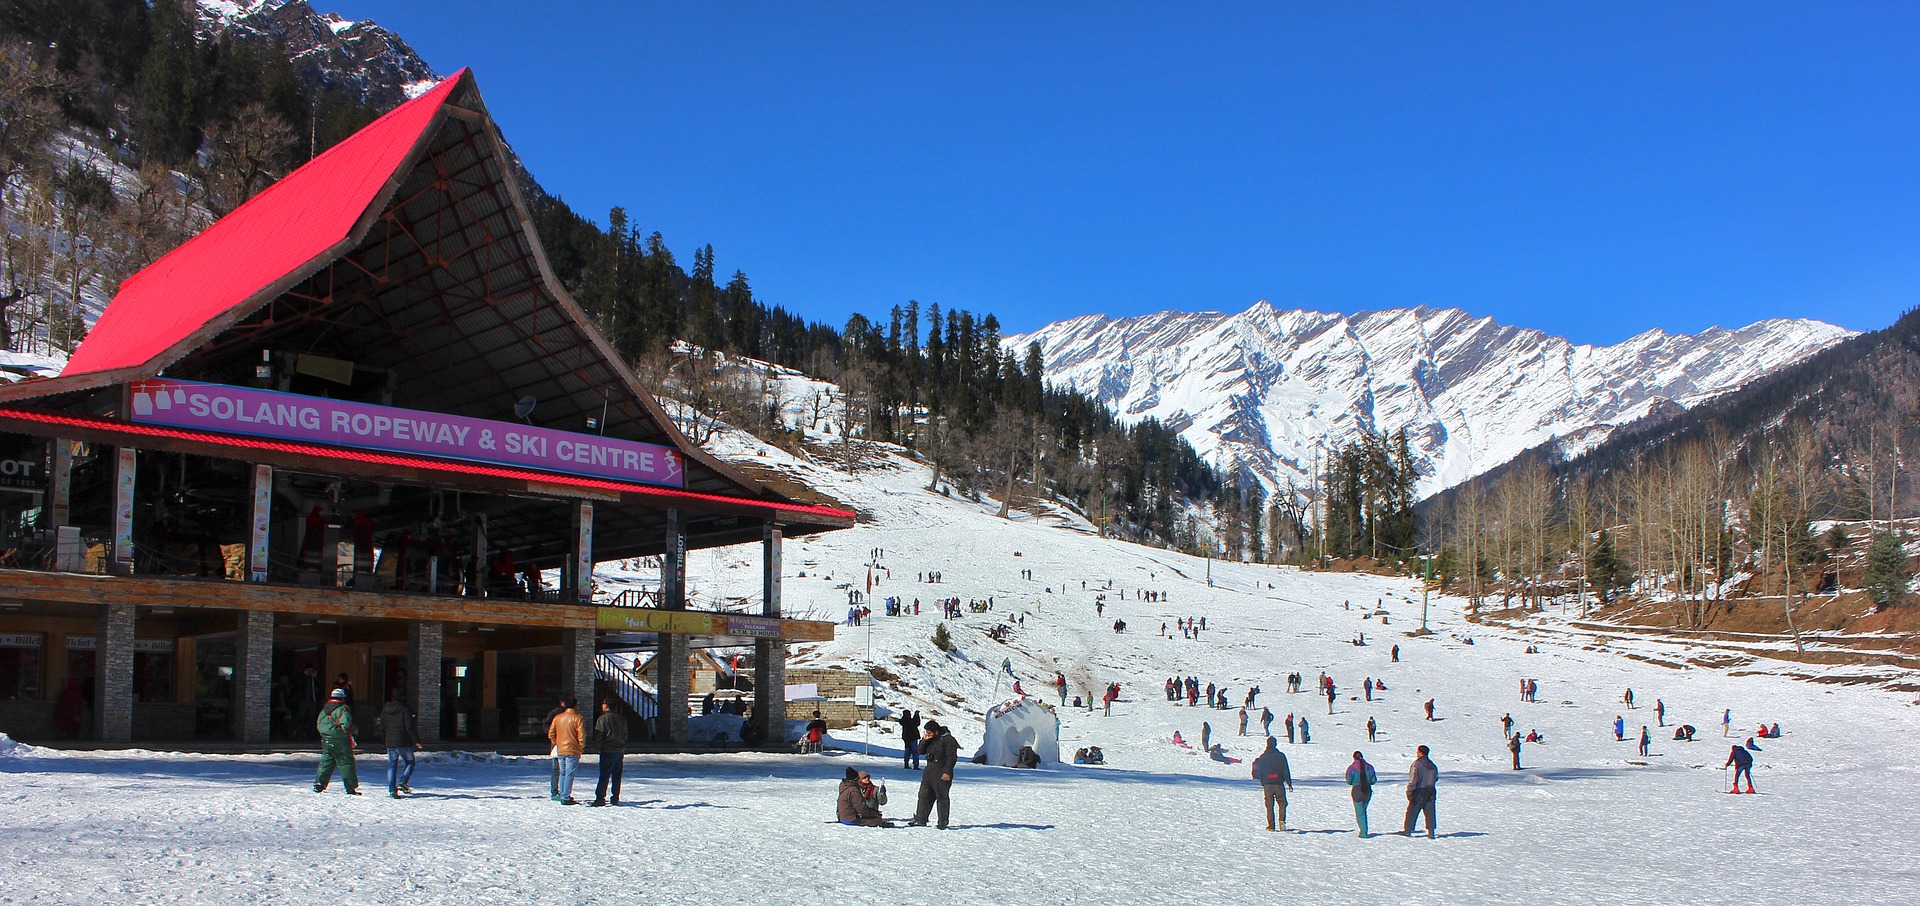 trip to manali from delhi